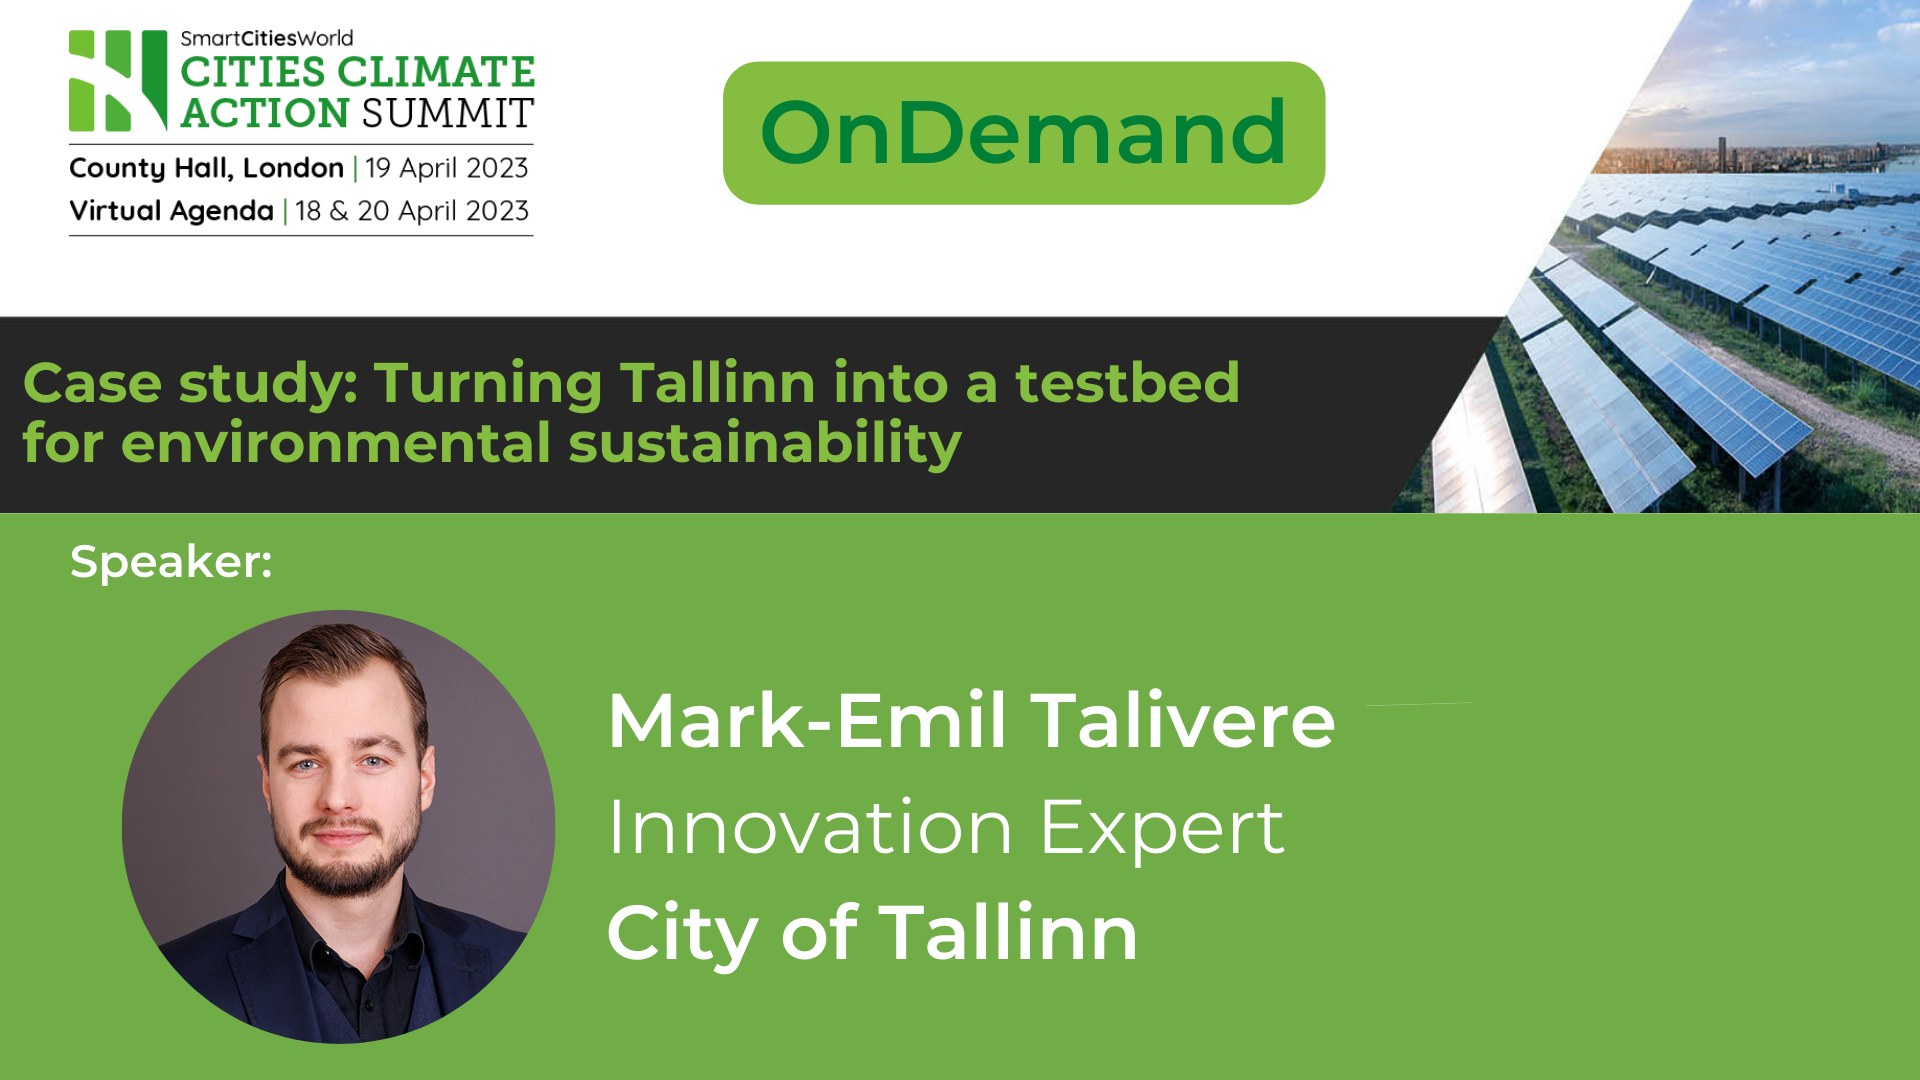 OnDemand Case study: Turning Tallinn into a testbed for environmental sustainability